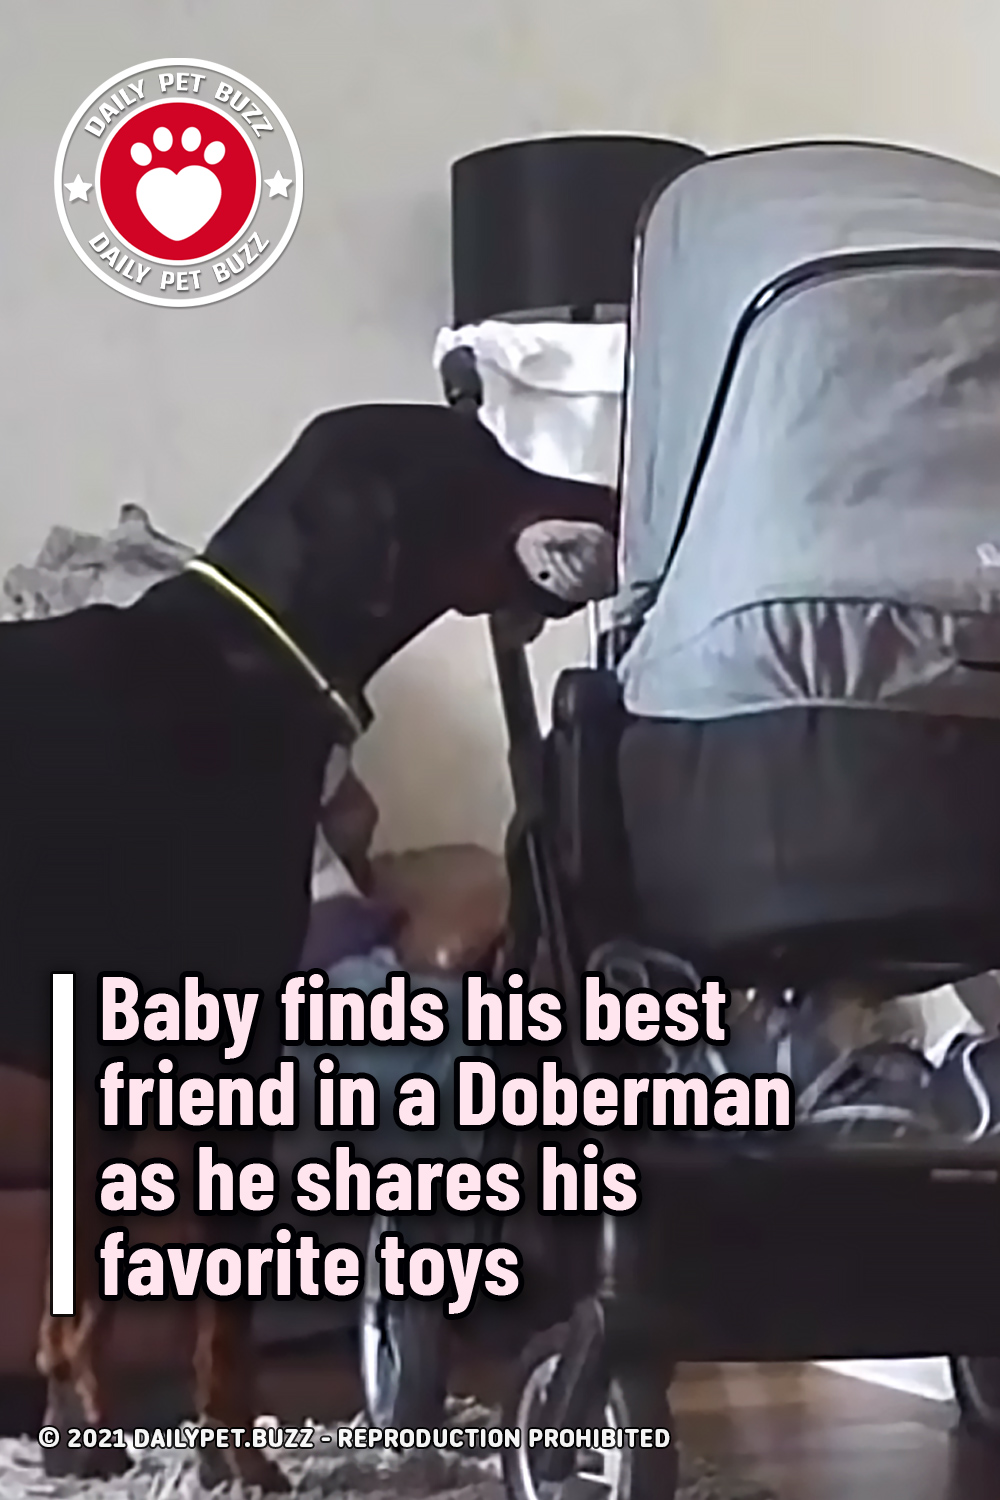 Baby finds his best friend in a Doberman as he shares his favorite toys